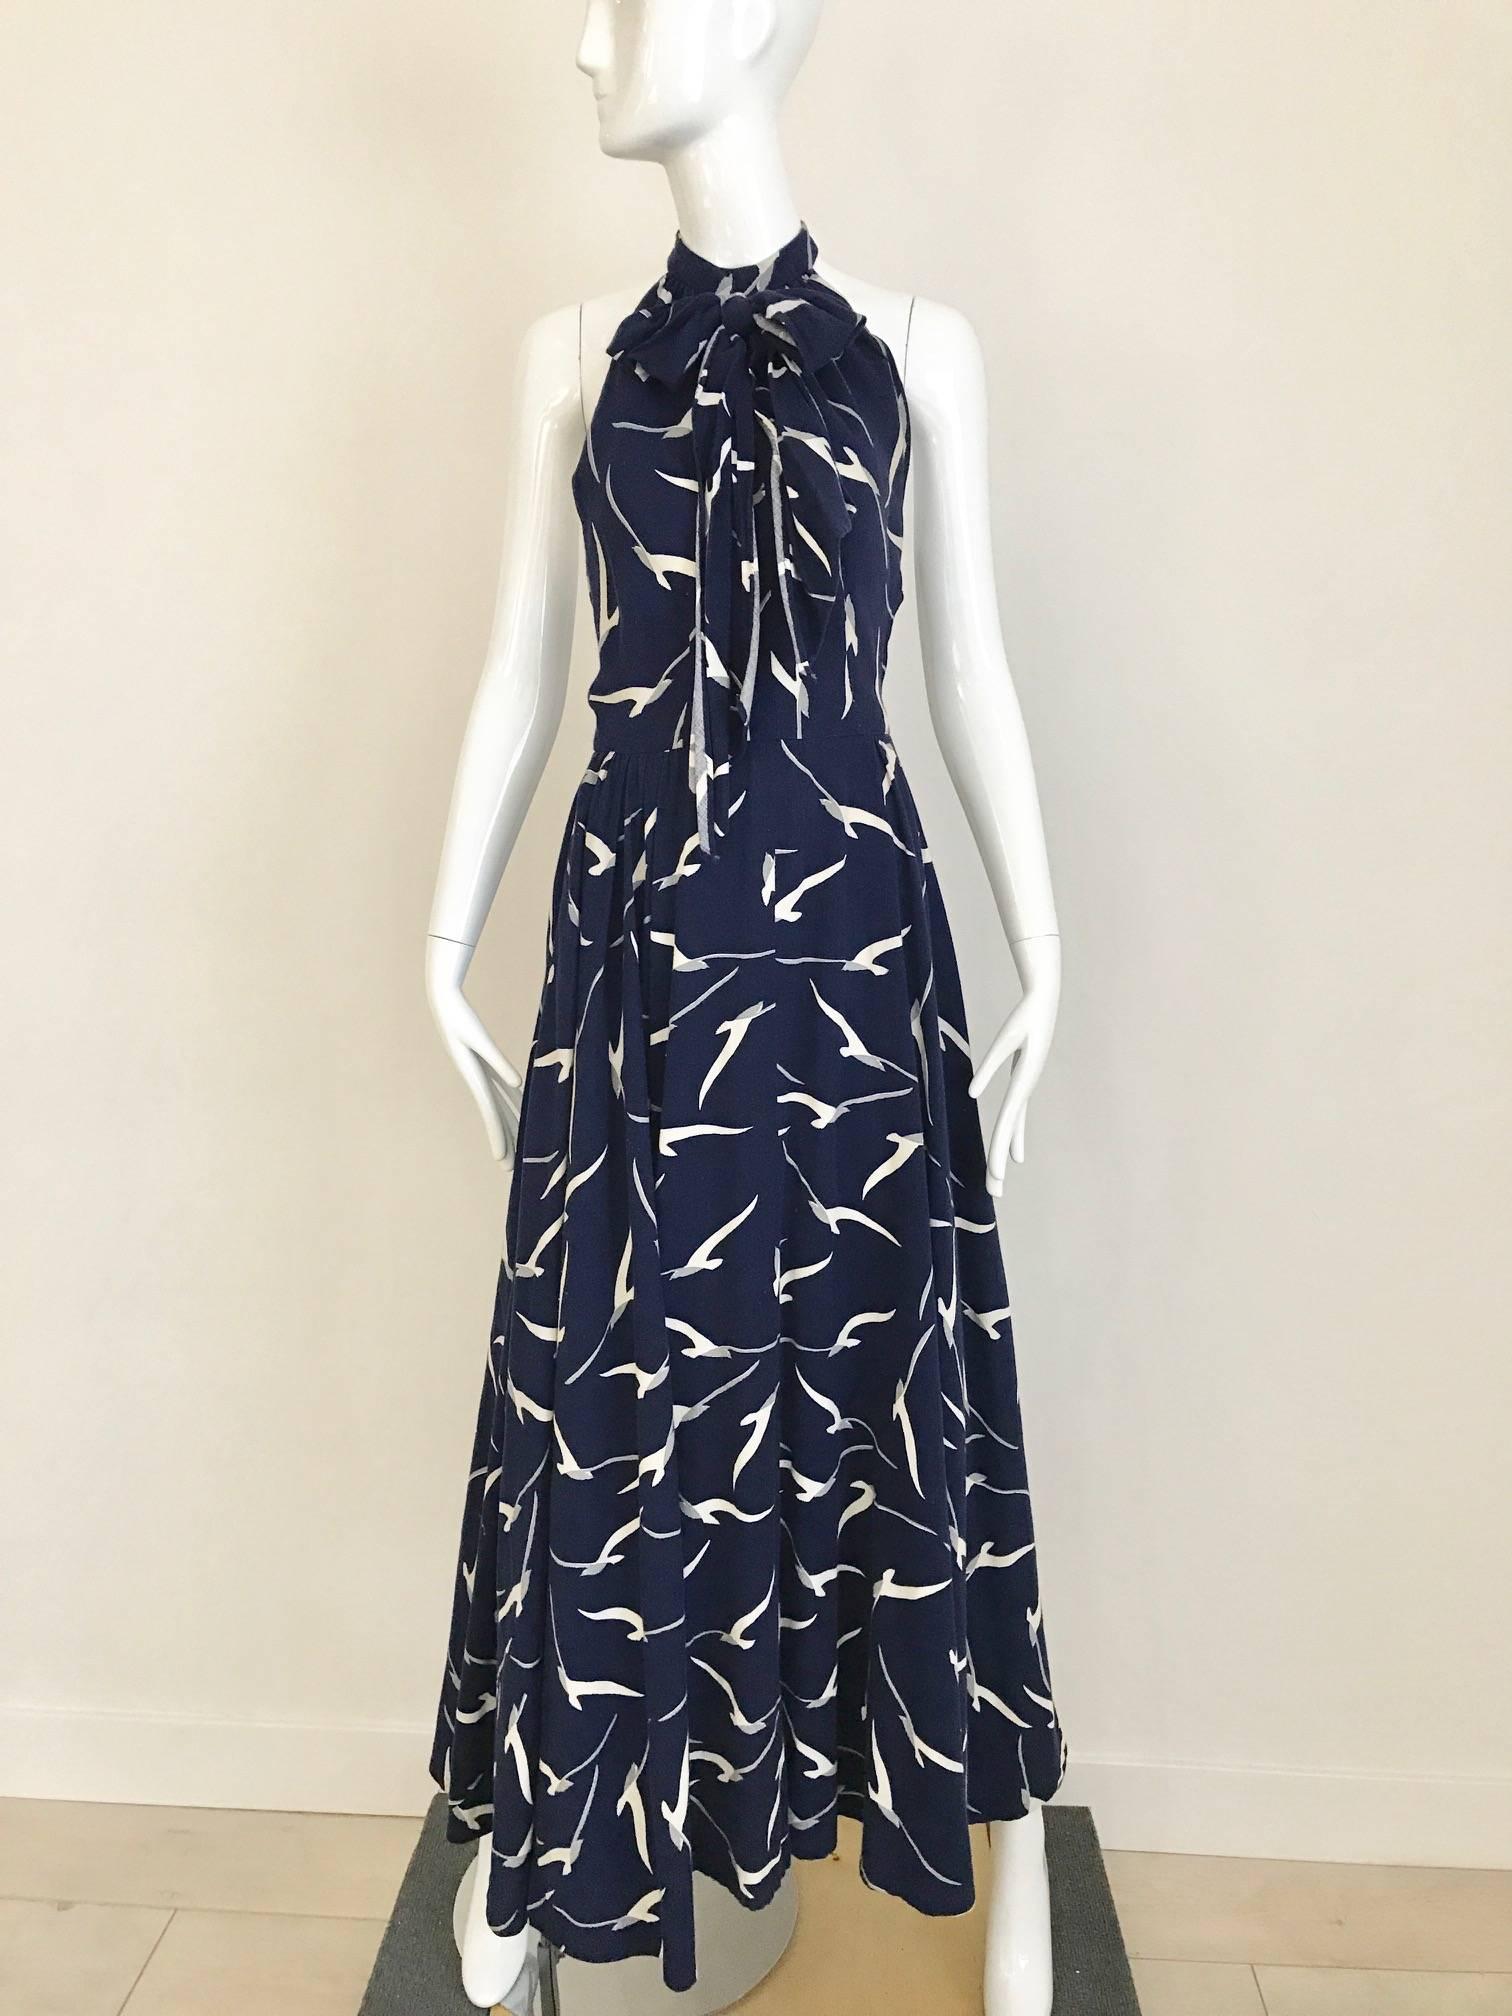 Vintage 1970s Blue and White Seagull Print Halter Cotton Maxi Dress.
Perfect Summer vacation dress.   Fit Size 0/2 Xsmall - Small
Bust: 34 inch / Waist: 24 inch  /  Length: 61 inch